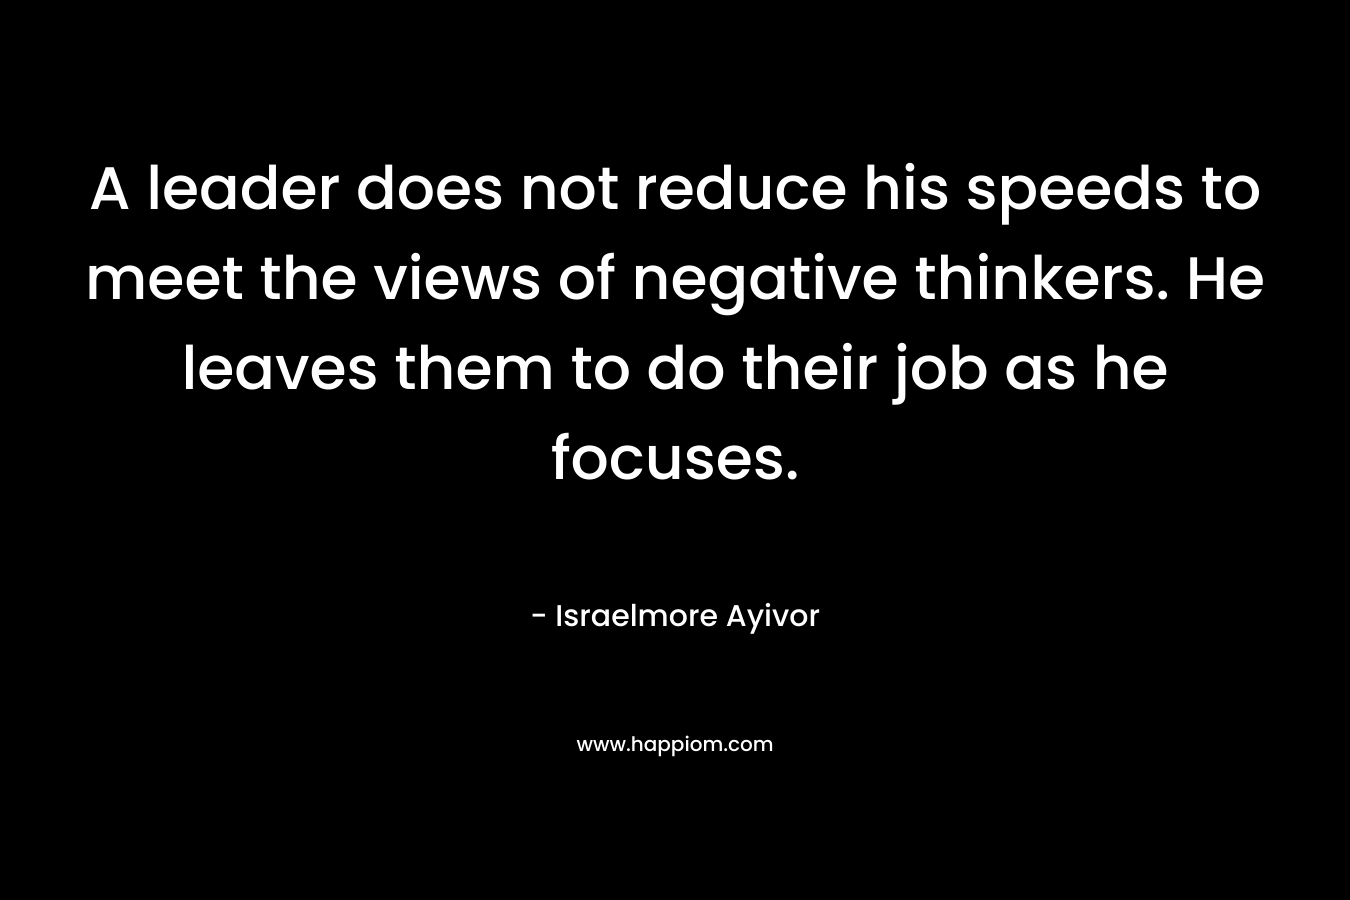 A leader does not reduce his speeds to meet the views of negative thinkers. He leaves them to do their job as he focuses.